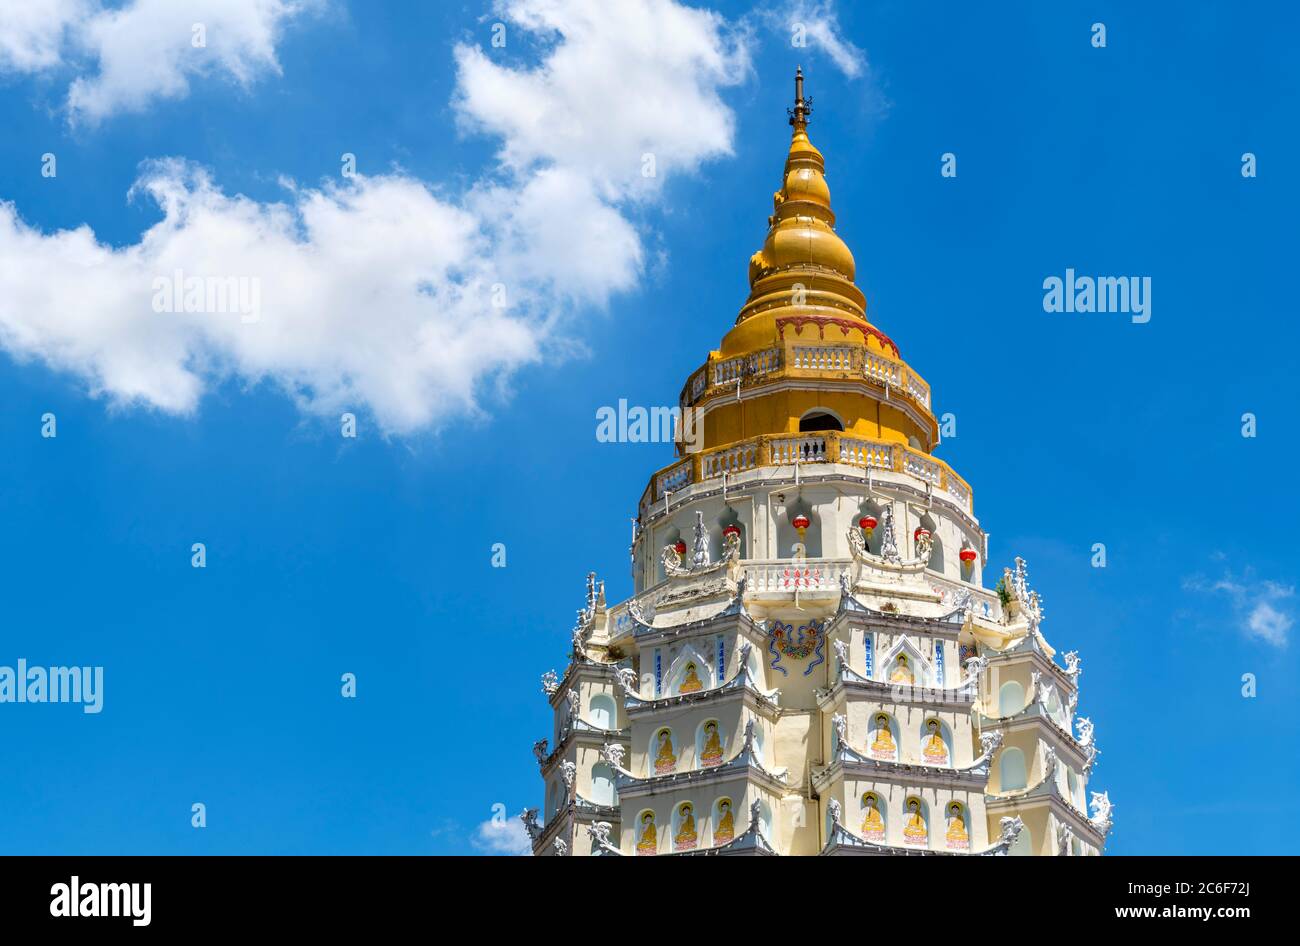 Top of the Ten Thousand Buddhas Pagoda at Kek Lok Si Temple, a buddhist temple in Air Itam, Penang, Malaysia Stock Photo